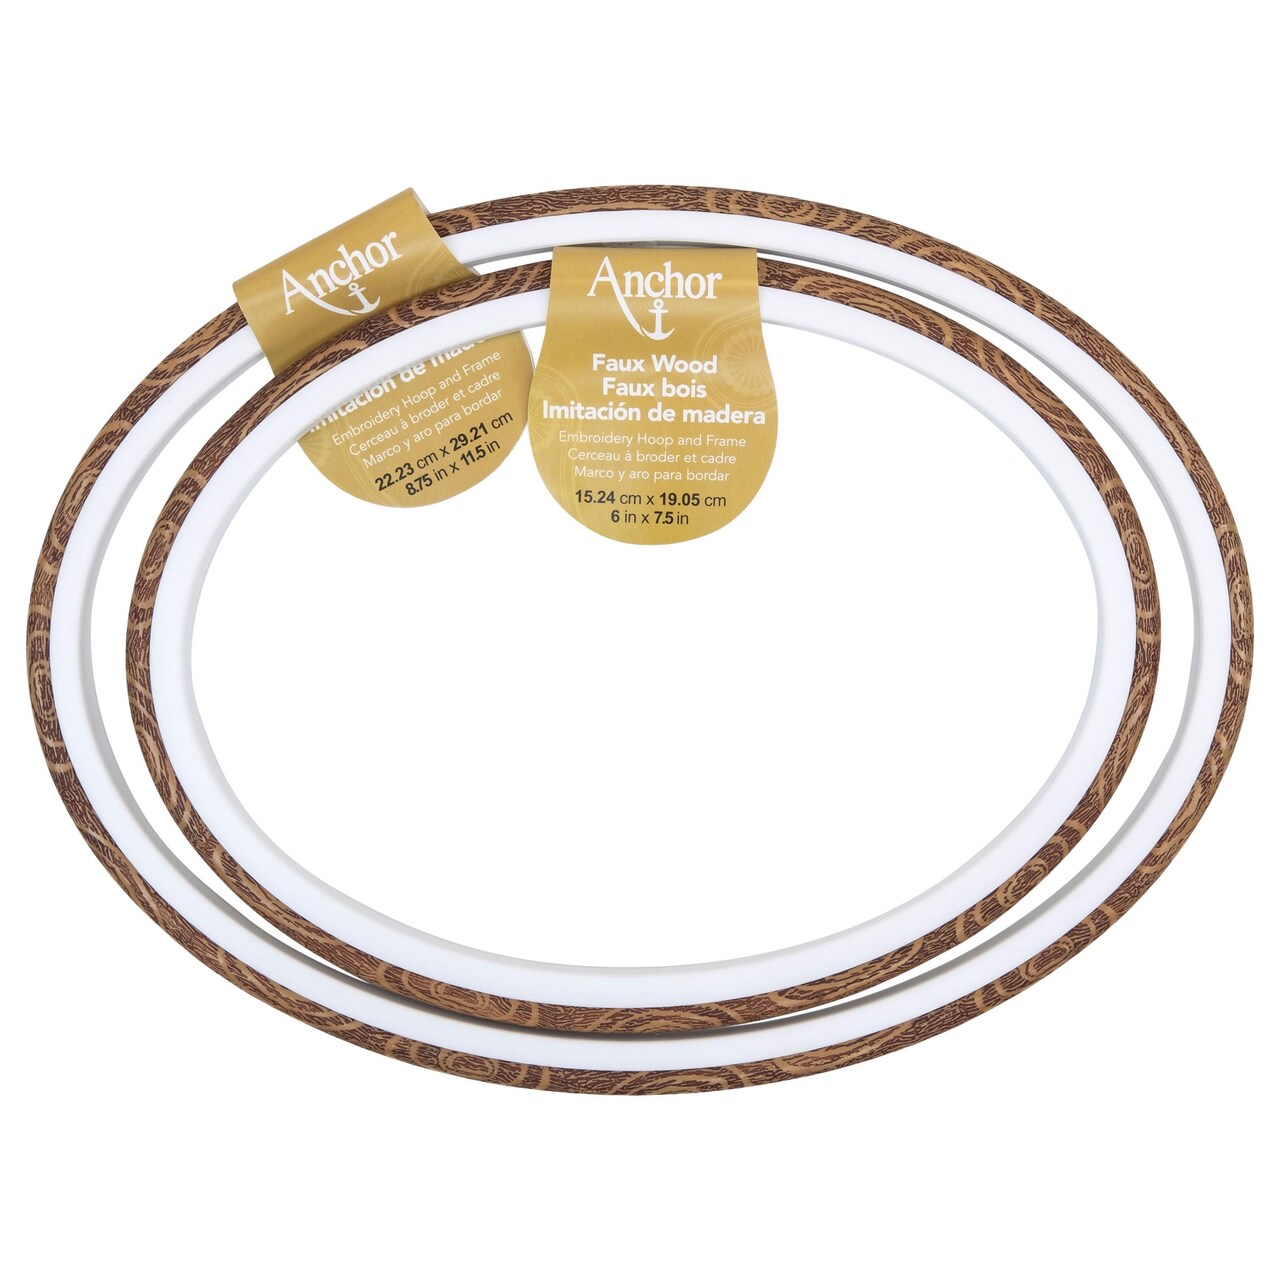 Anchor Faux Wood Oval Embroidery Hoop 8-Interior Of Oval Hoop Is 6X7.5